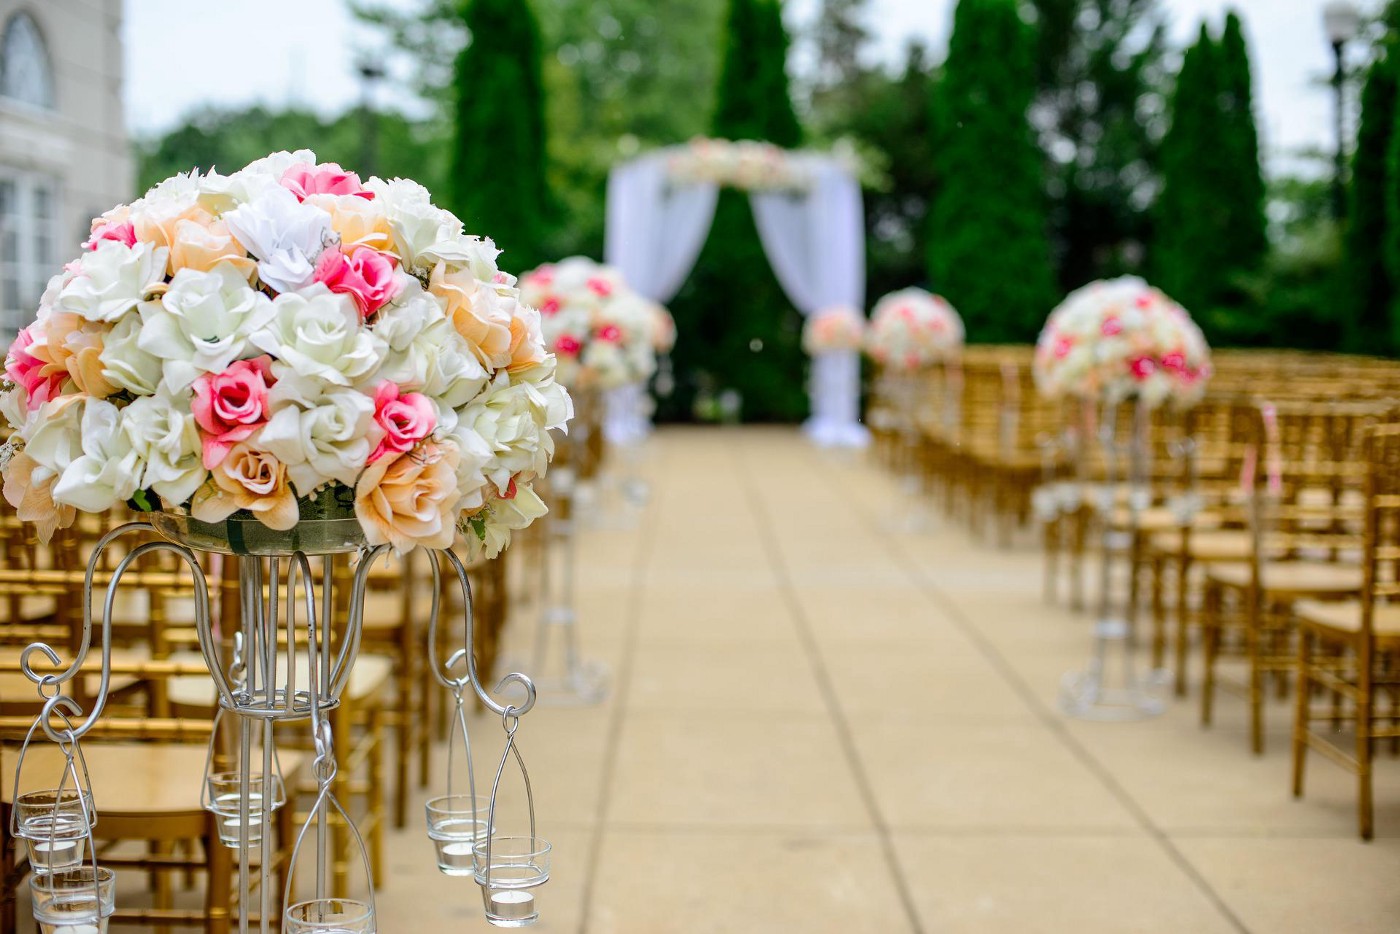 Outdoor wedding setup with center aisle and rows of wooden chairs. A cloth draped arch is at the end of the aisle and large bouquets of flowers are placed on some end chairs.